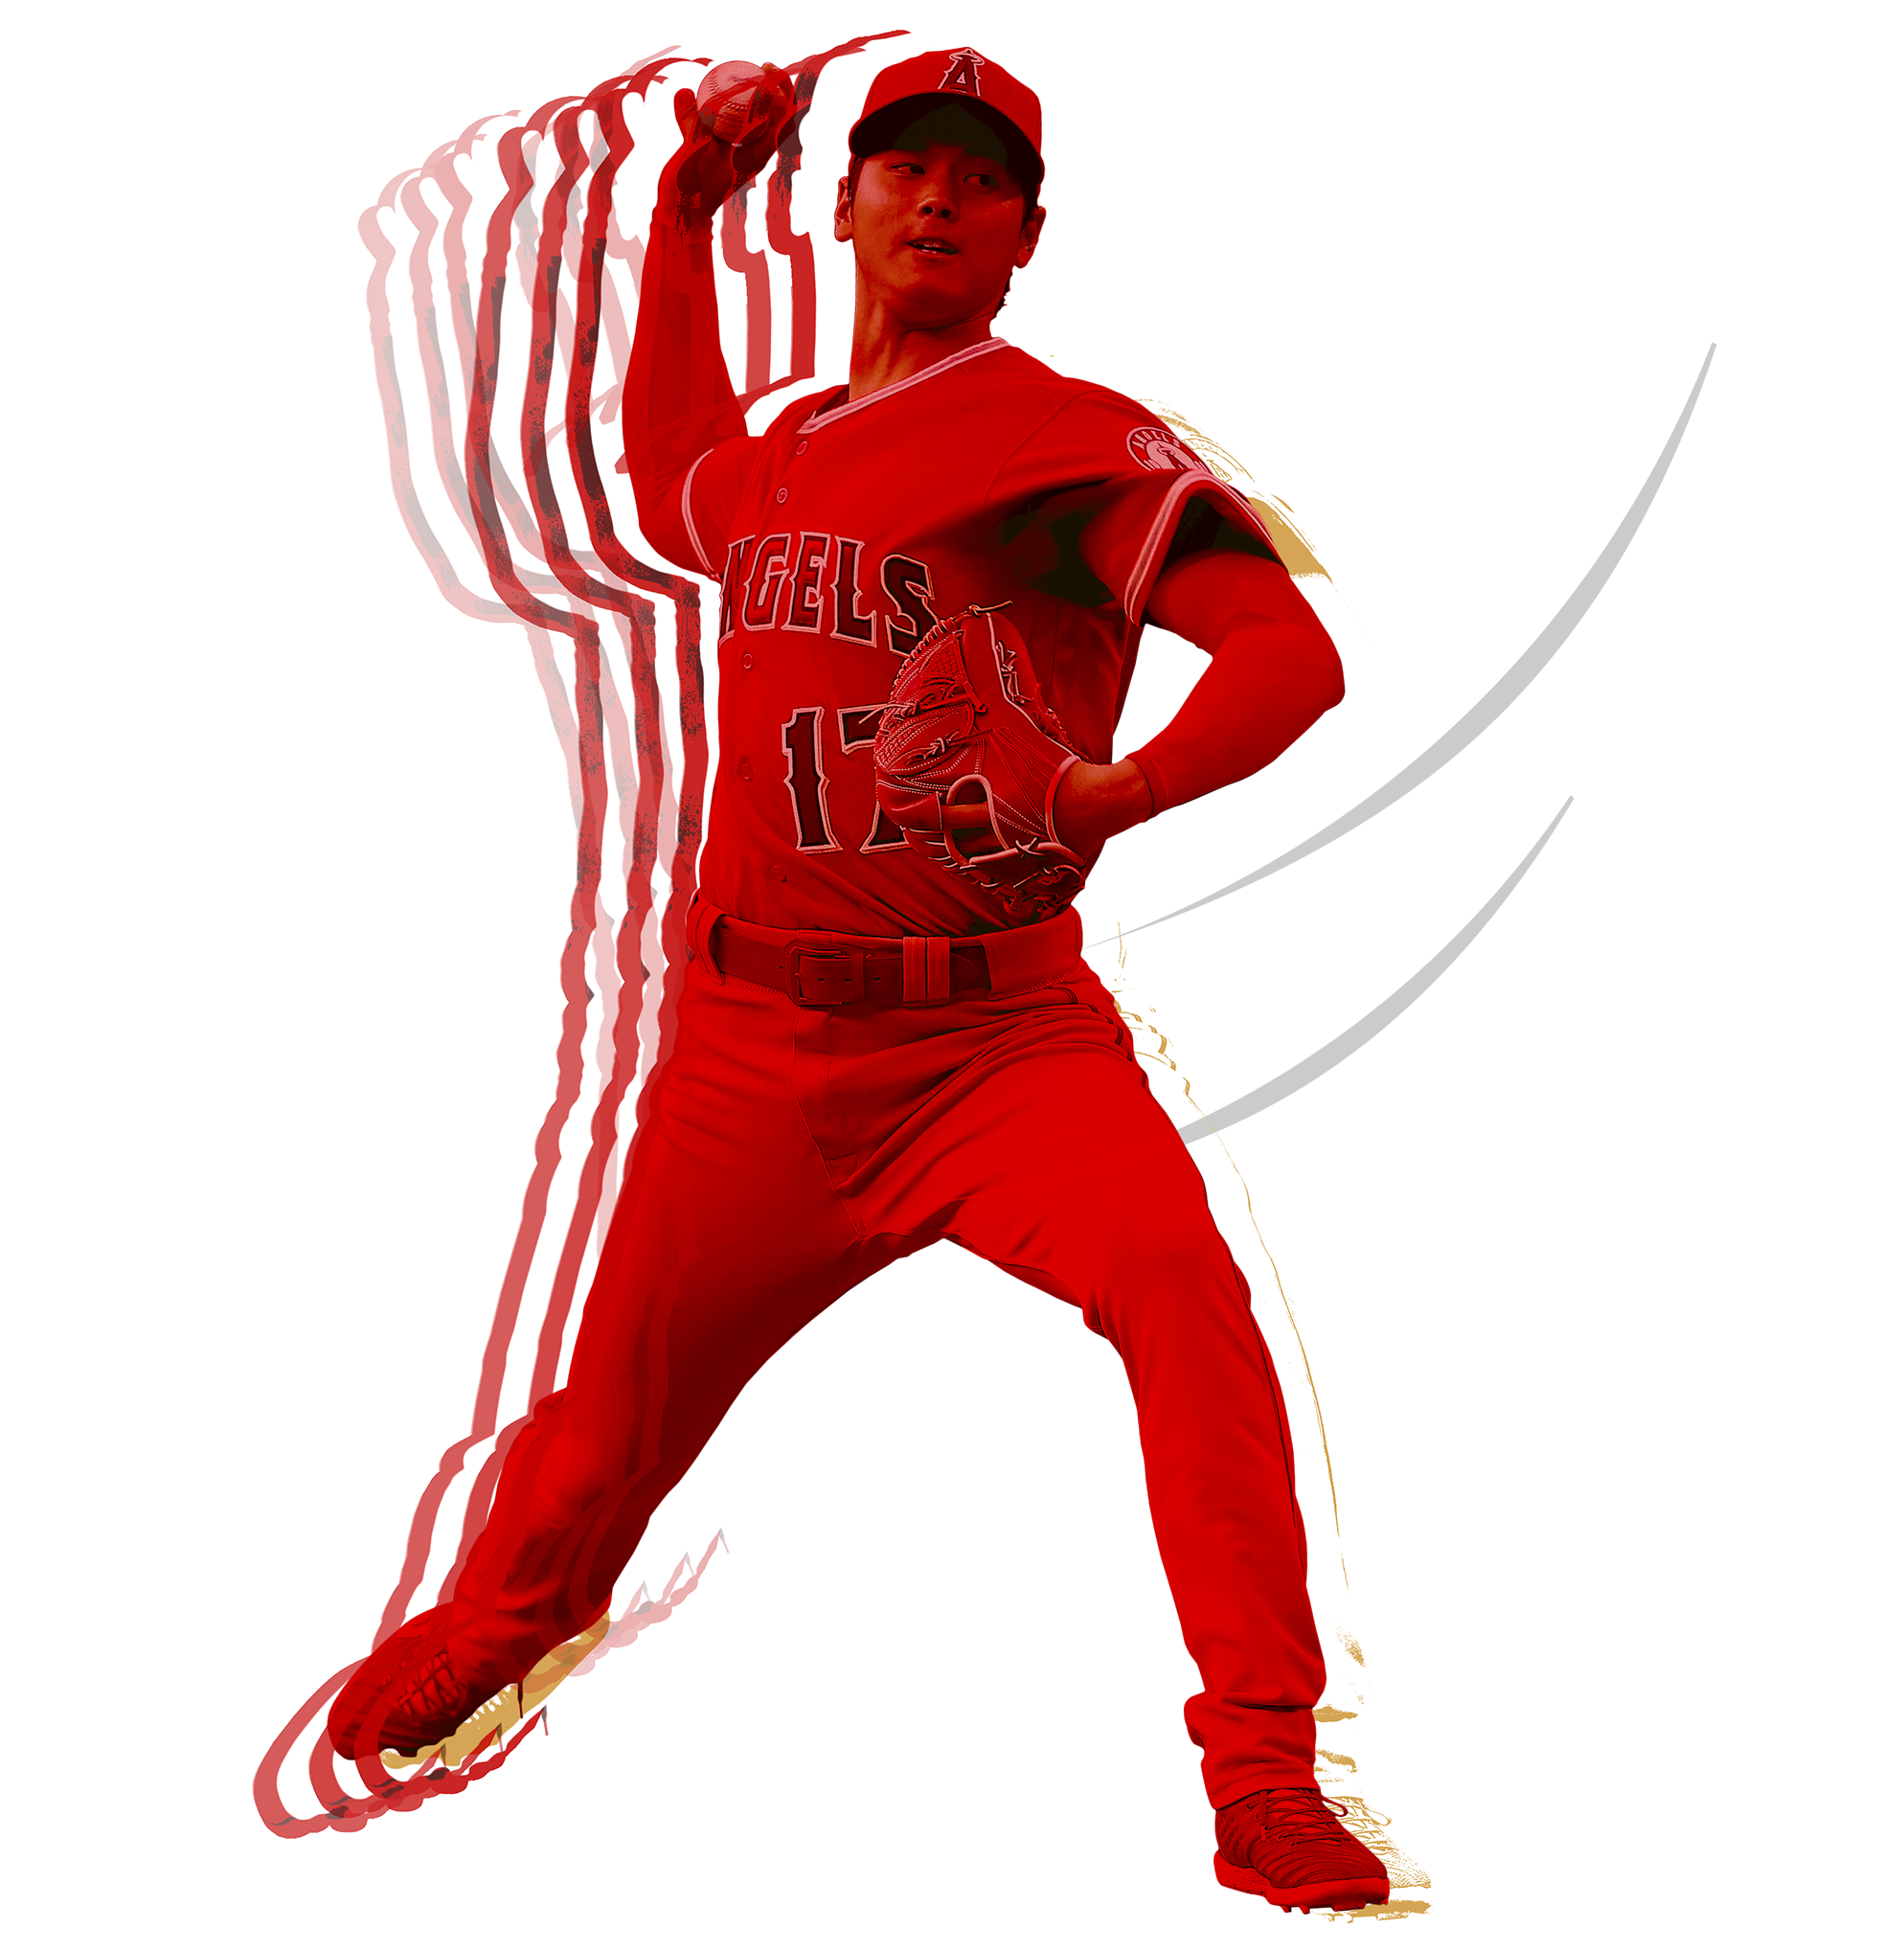 MLB The Show 22 - Silhouette